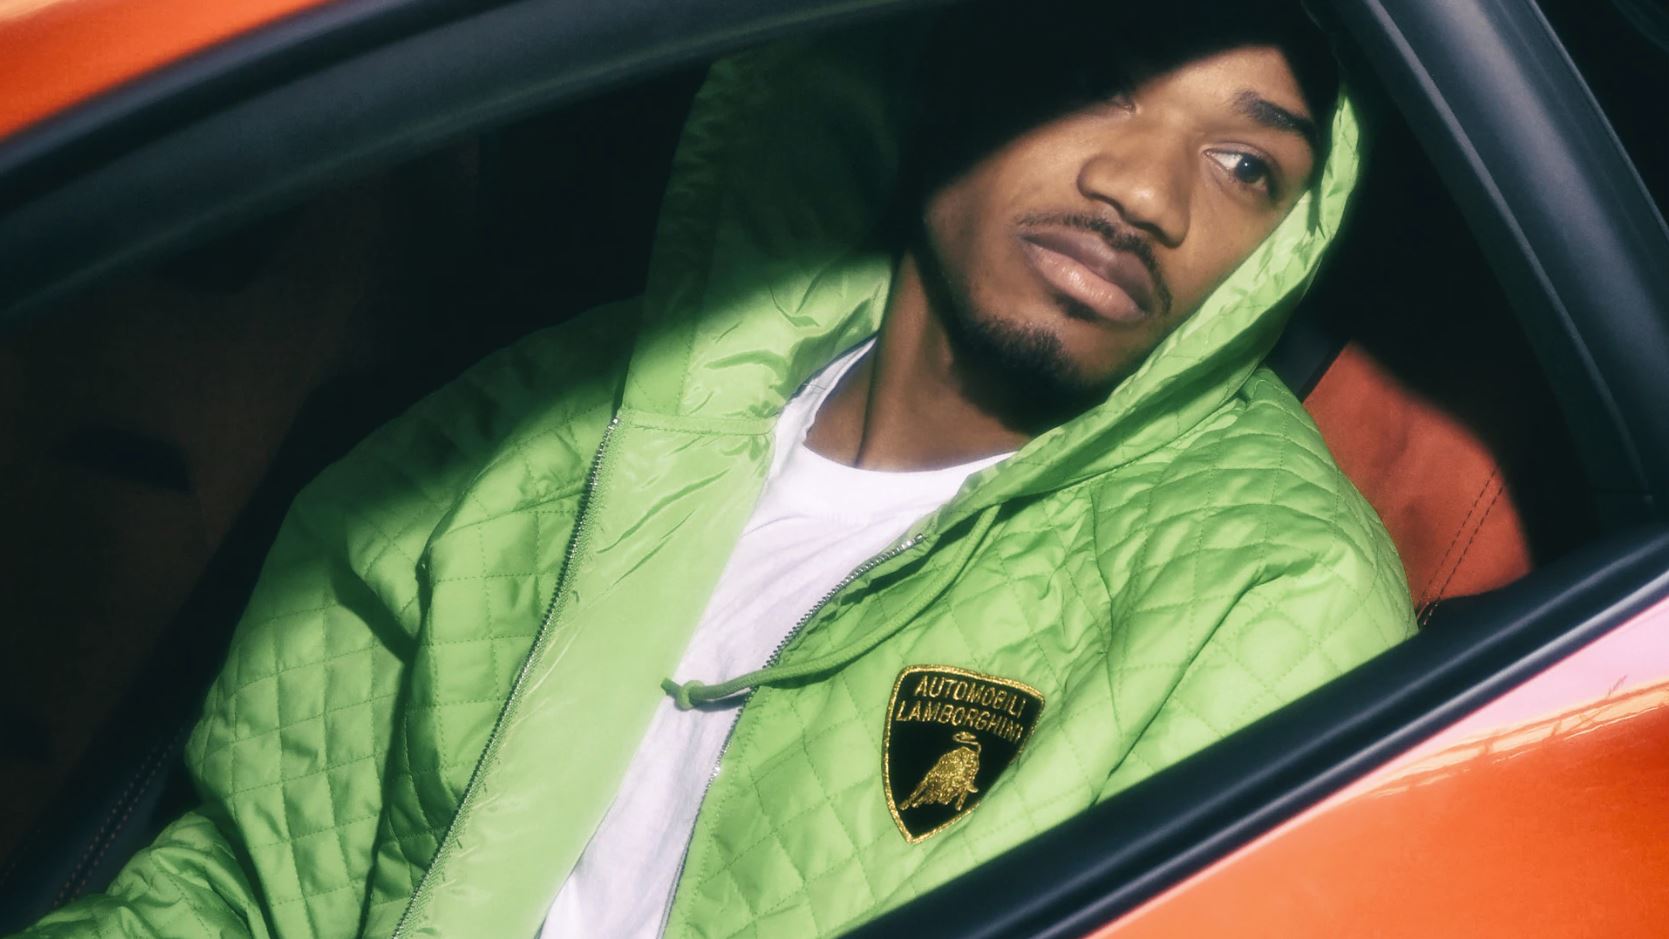 Rev your engines, Supreme x Lamborghini is on its way